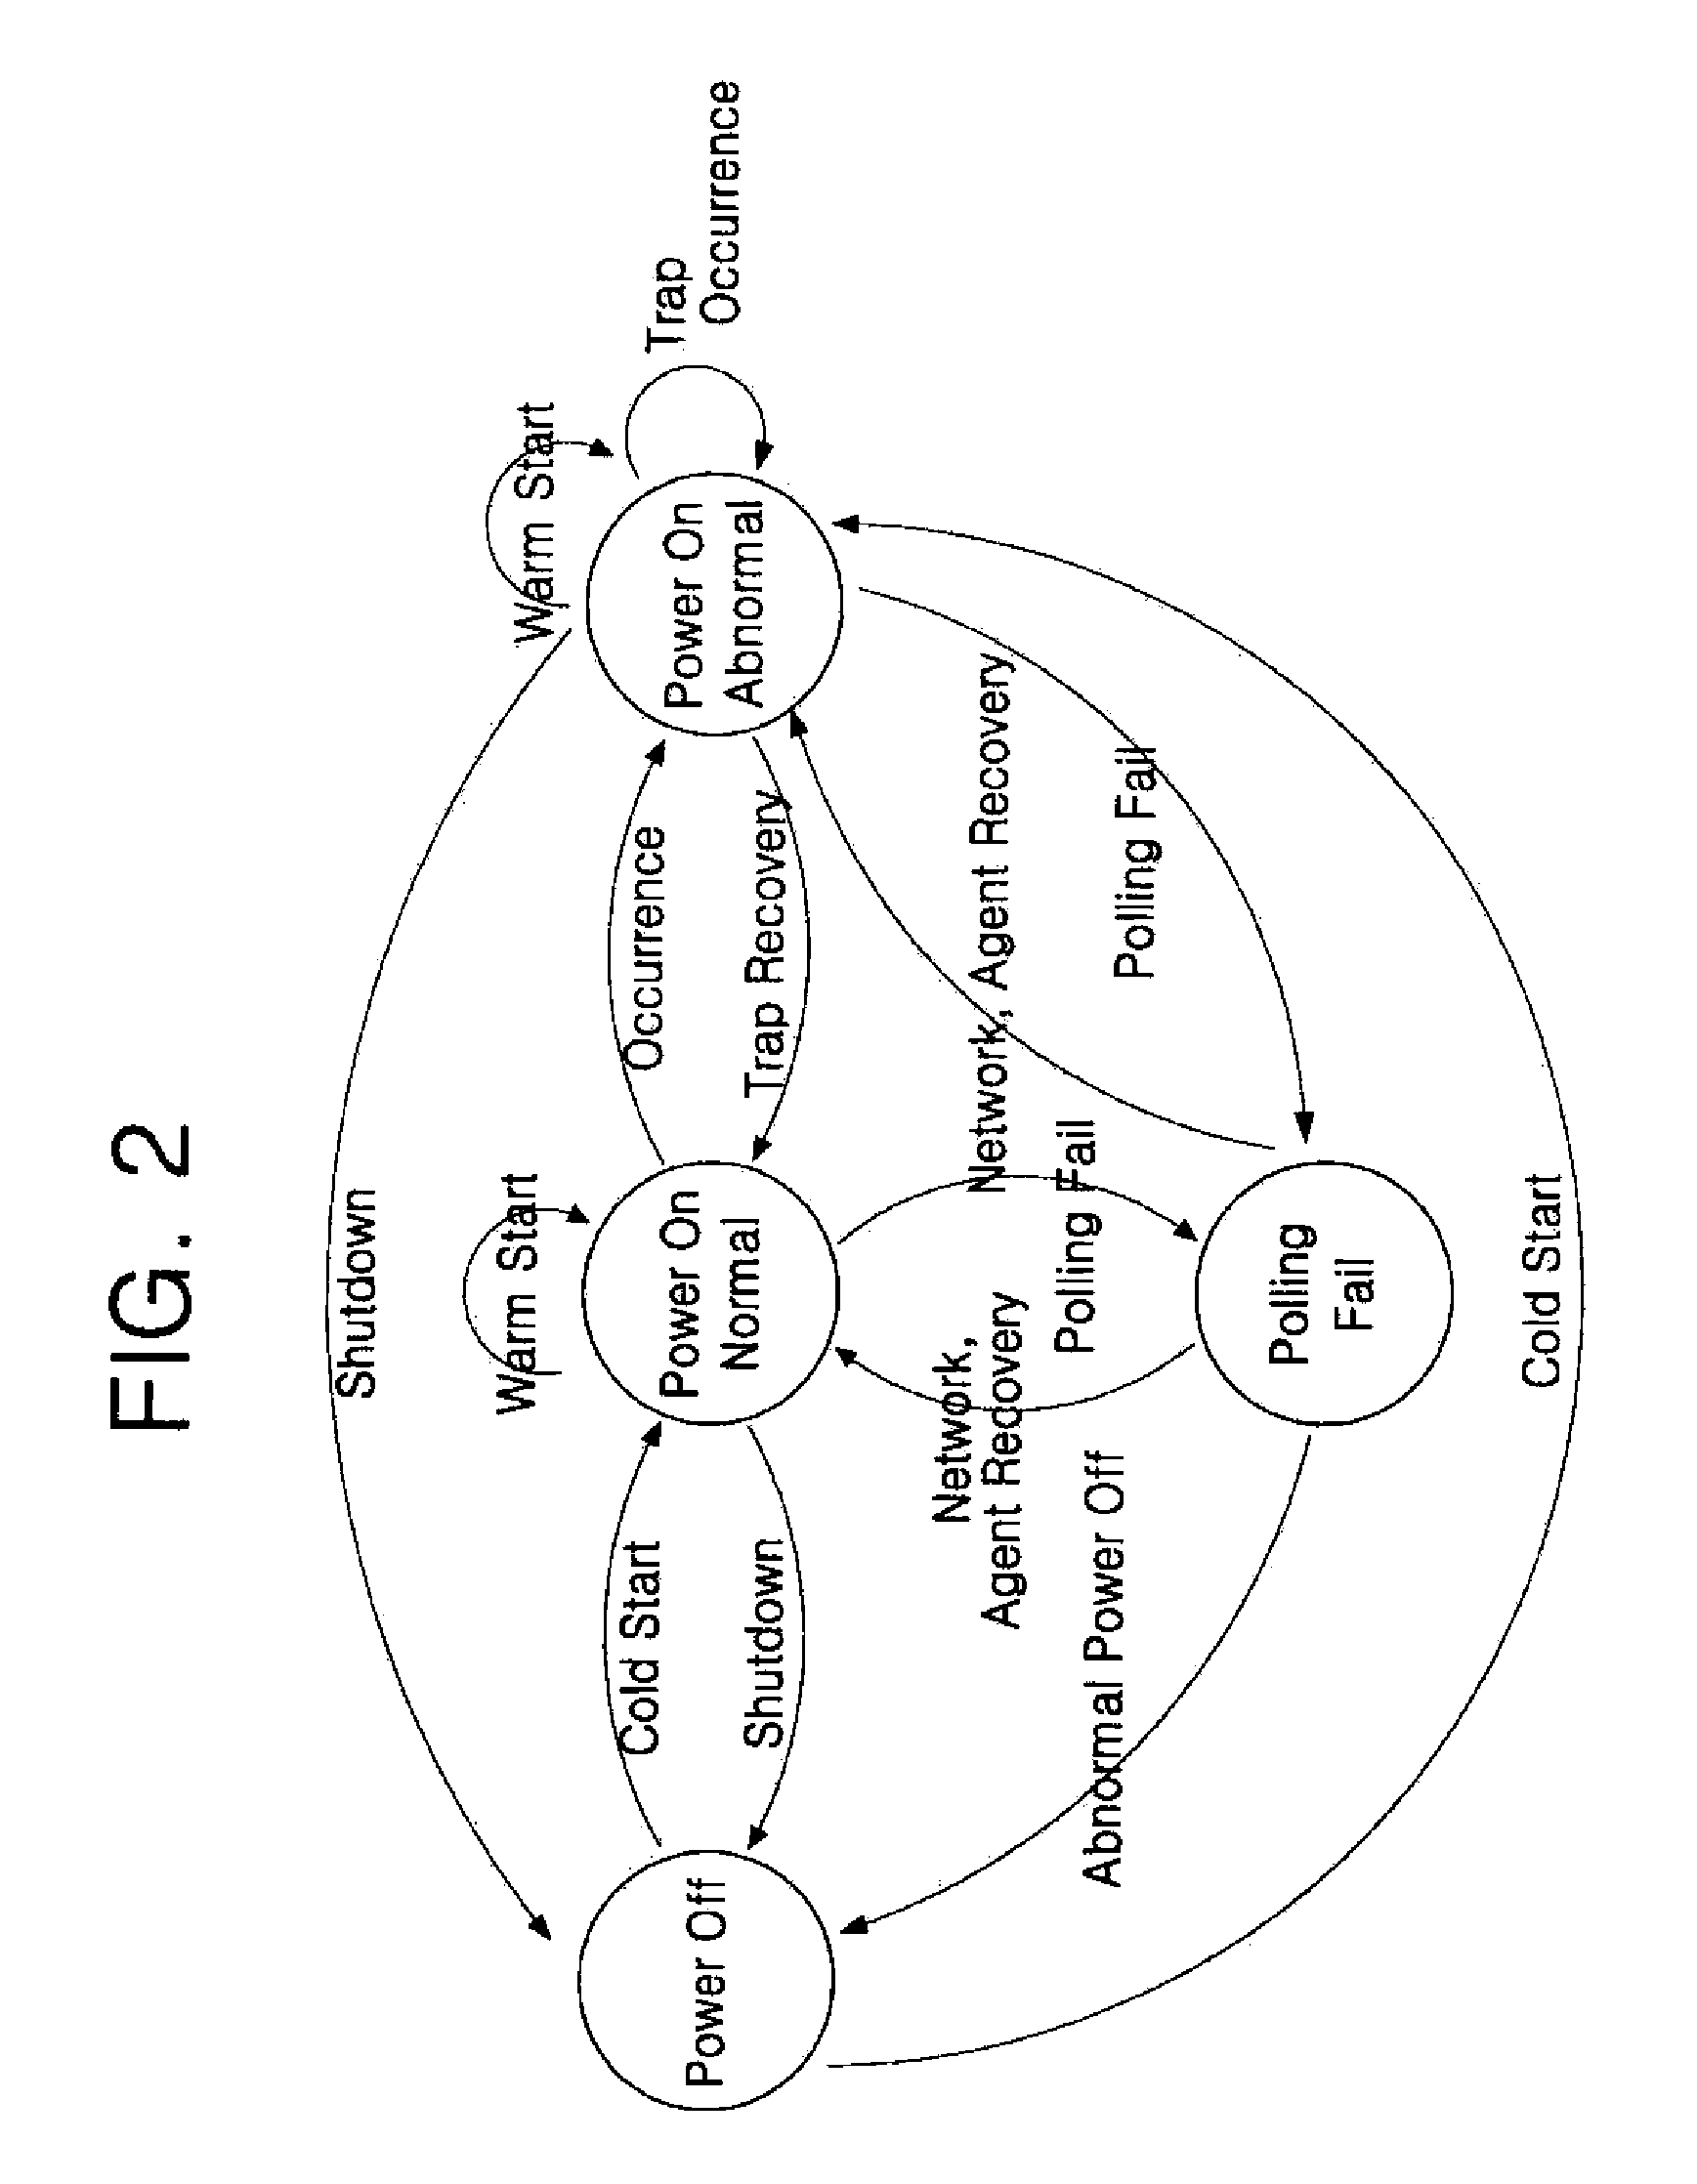 System and method for remote management of image processing device